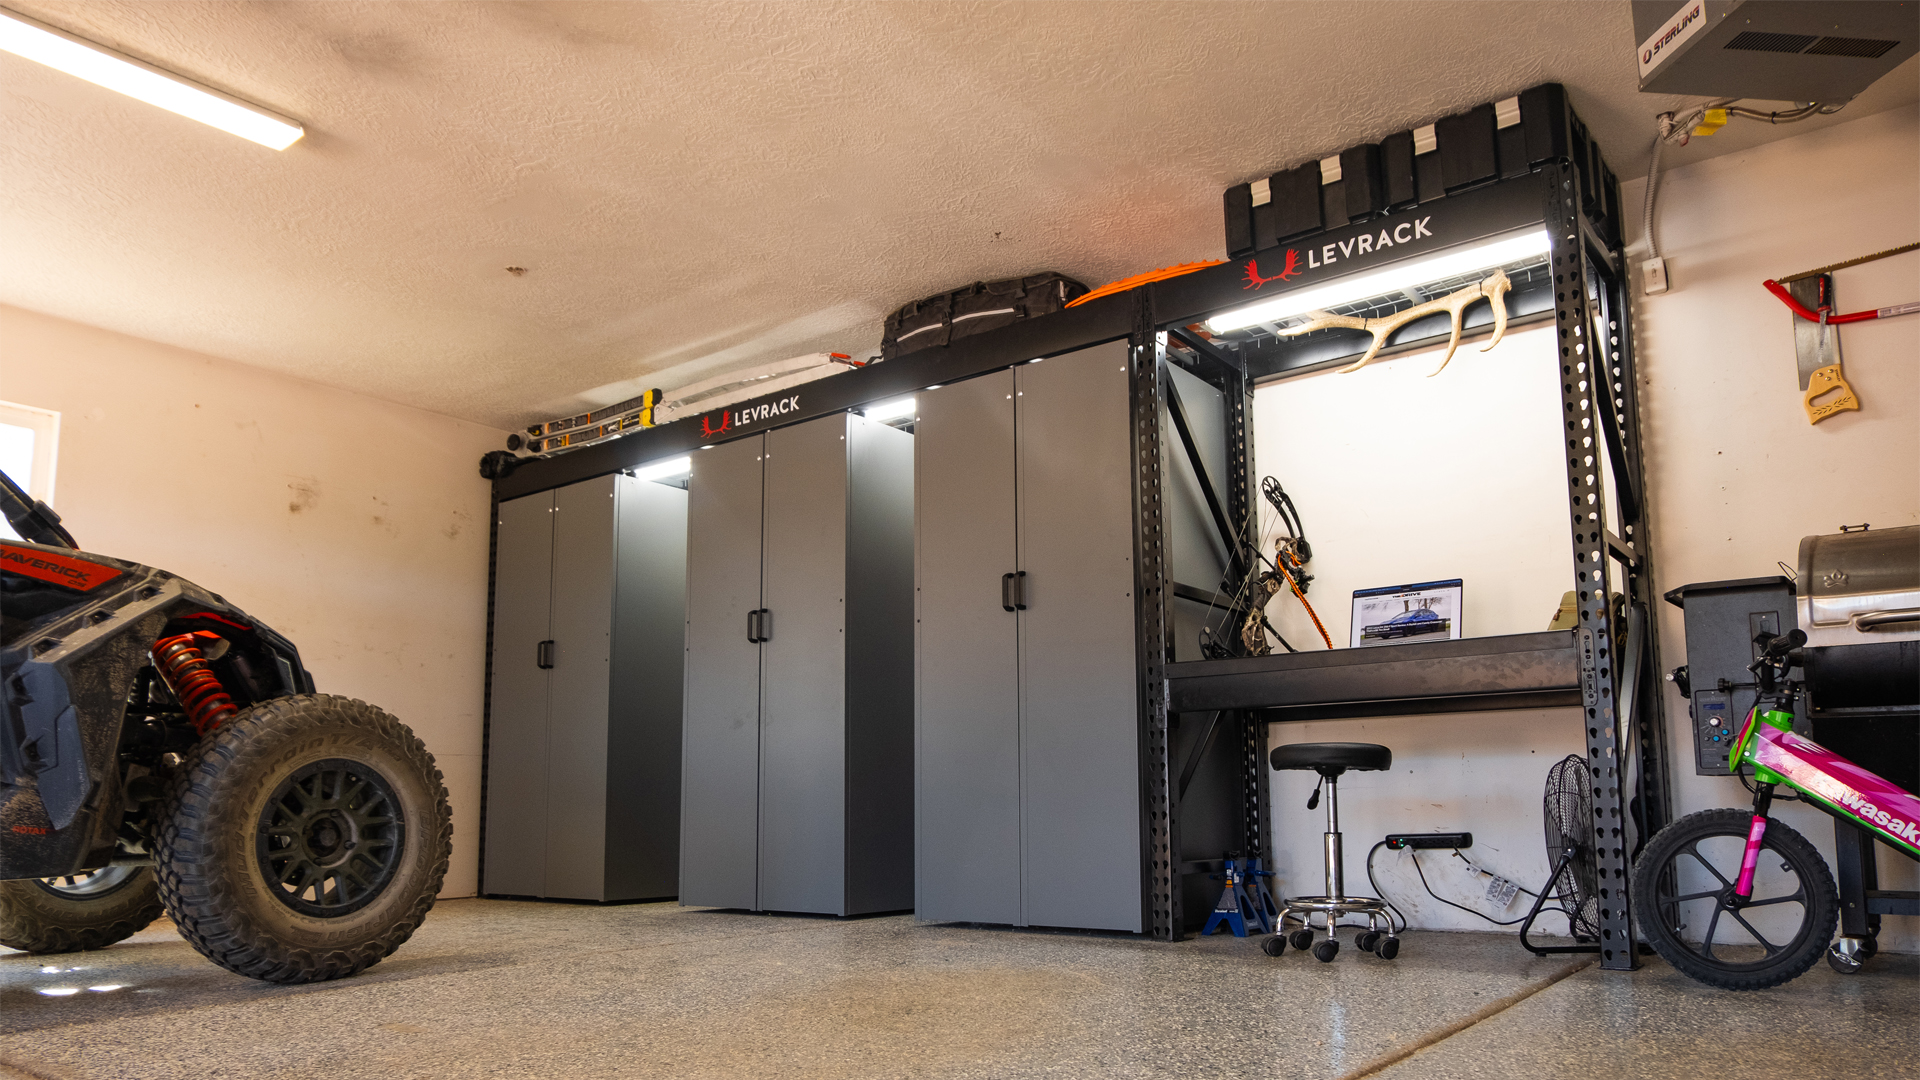 Initial Impressions: Levrack’s Storage System Finally Made My Garage Something Awesome